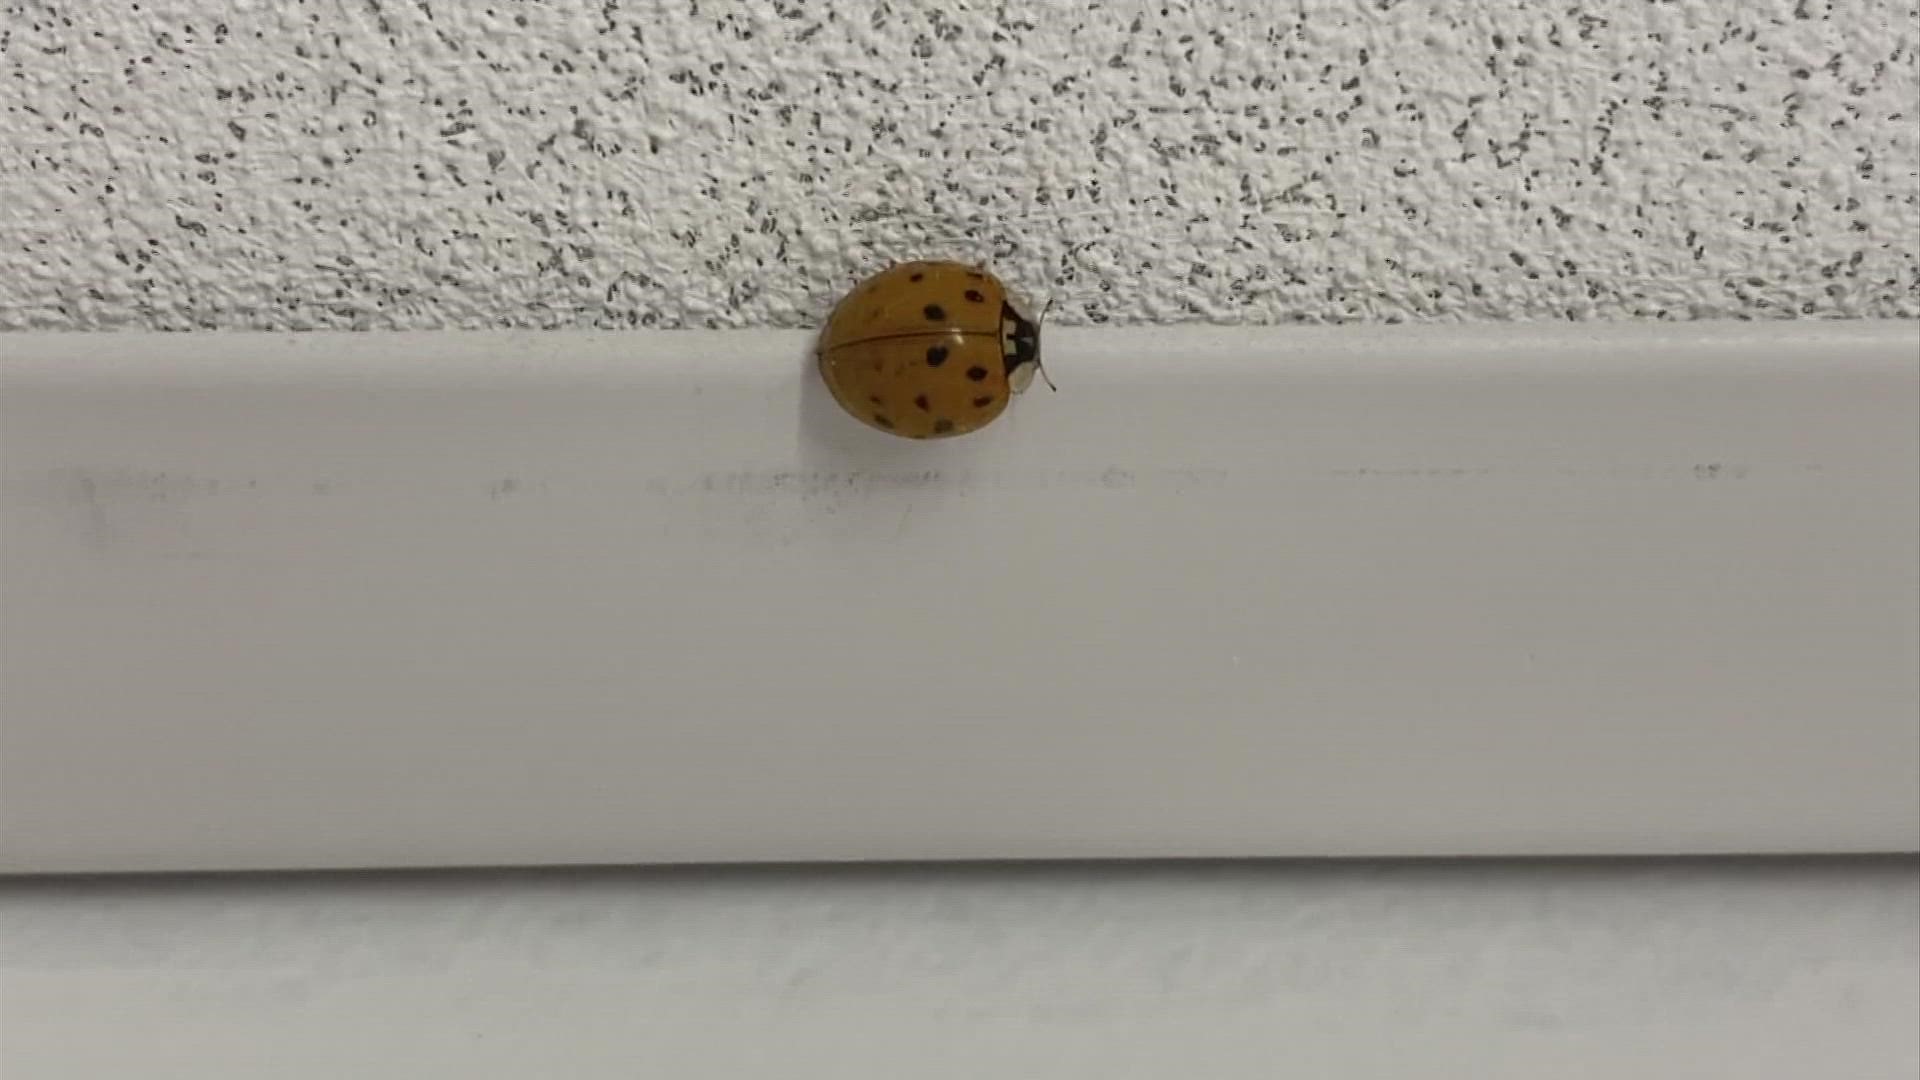 Entomologists have noticed more ladybugs this year as they start to sneak into our homes.